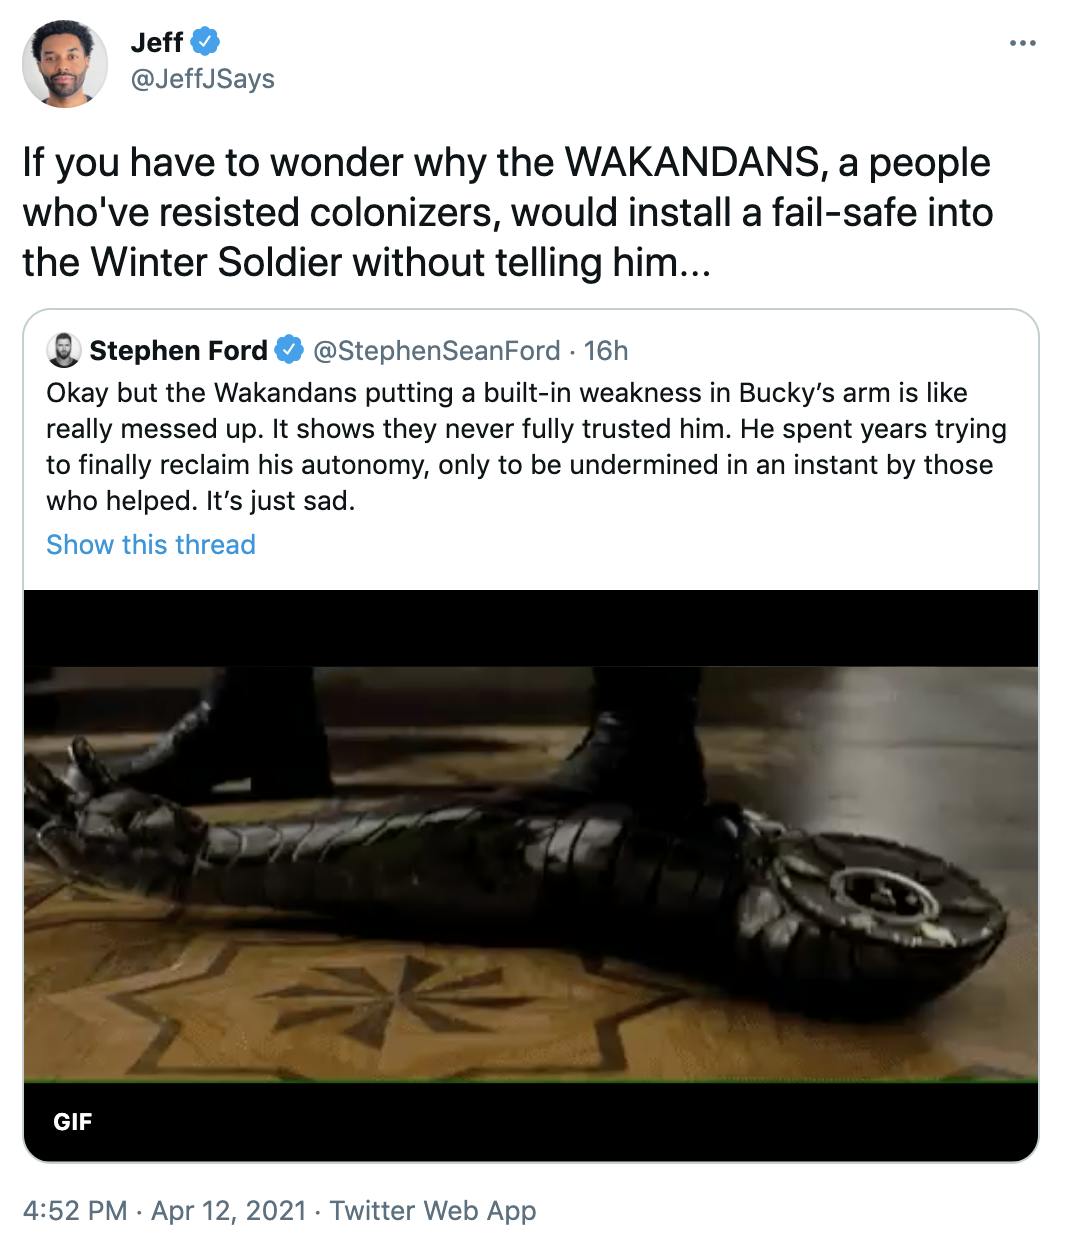 If you have to wonder why the WAKANDANS, a people who've resisted colonizers, would install a fail-safe into the Winter Soldier without telling him...